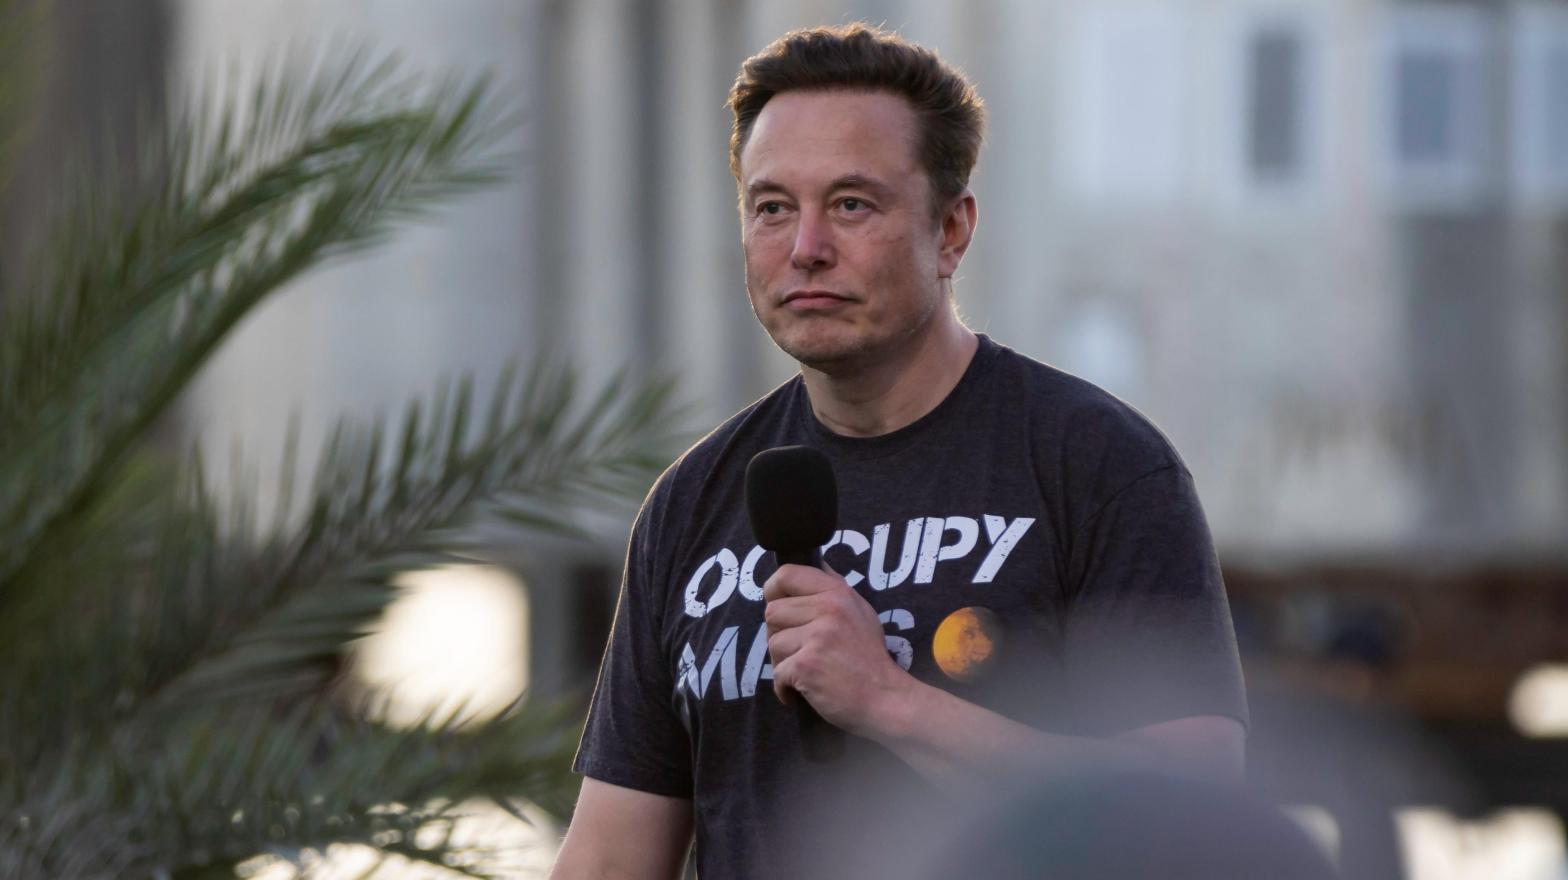 SpaceX founder Elon Musk during a T-Mobile and SpaceX joint event on August 25, 2022 in Boca Chica Beach, Texas.  (Photo: Michael Gonzalez, Getty Images)